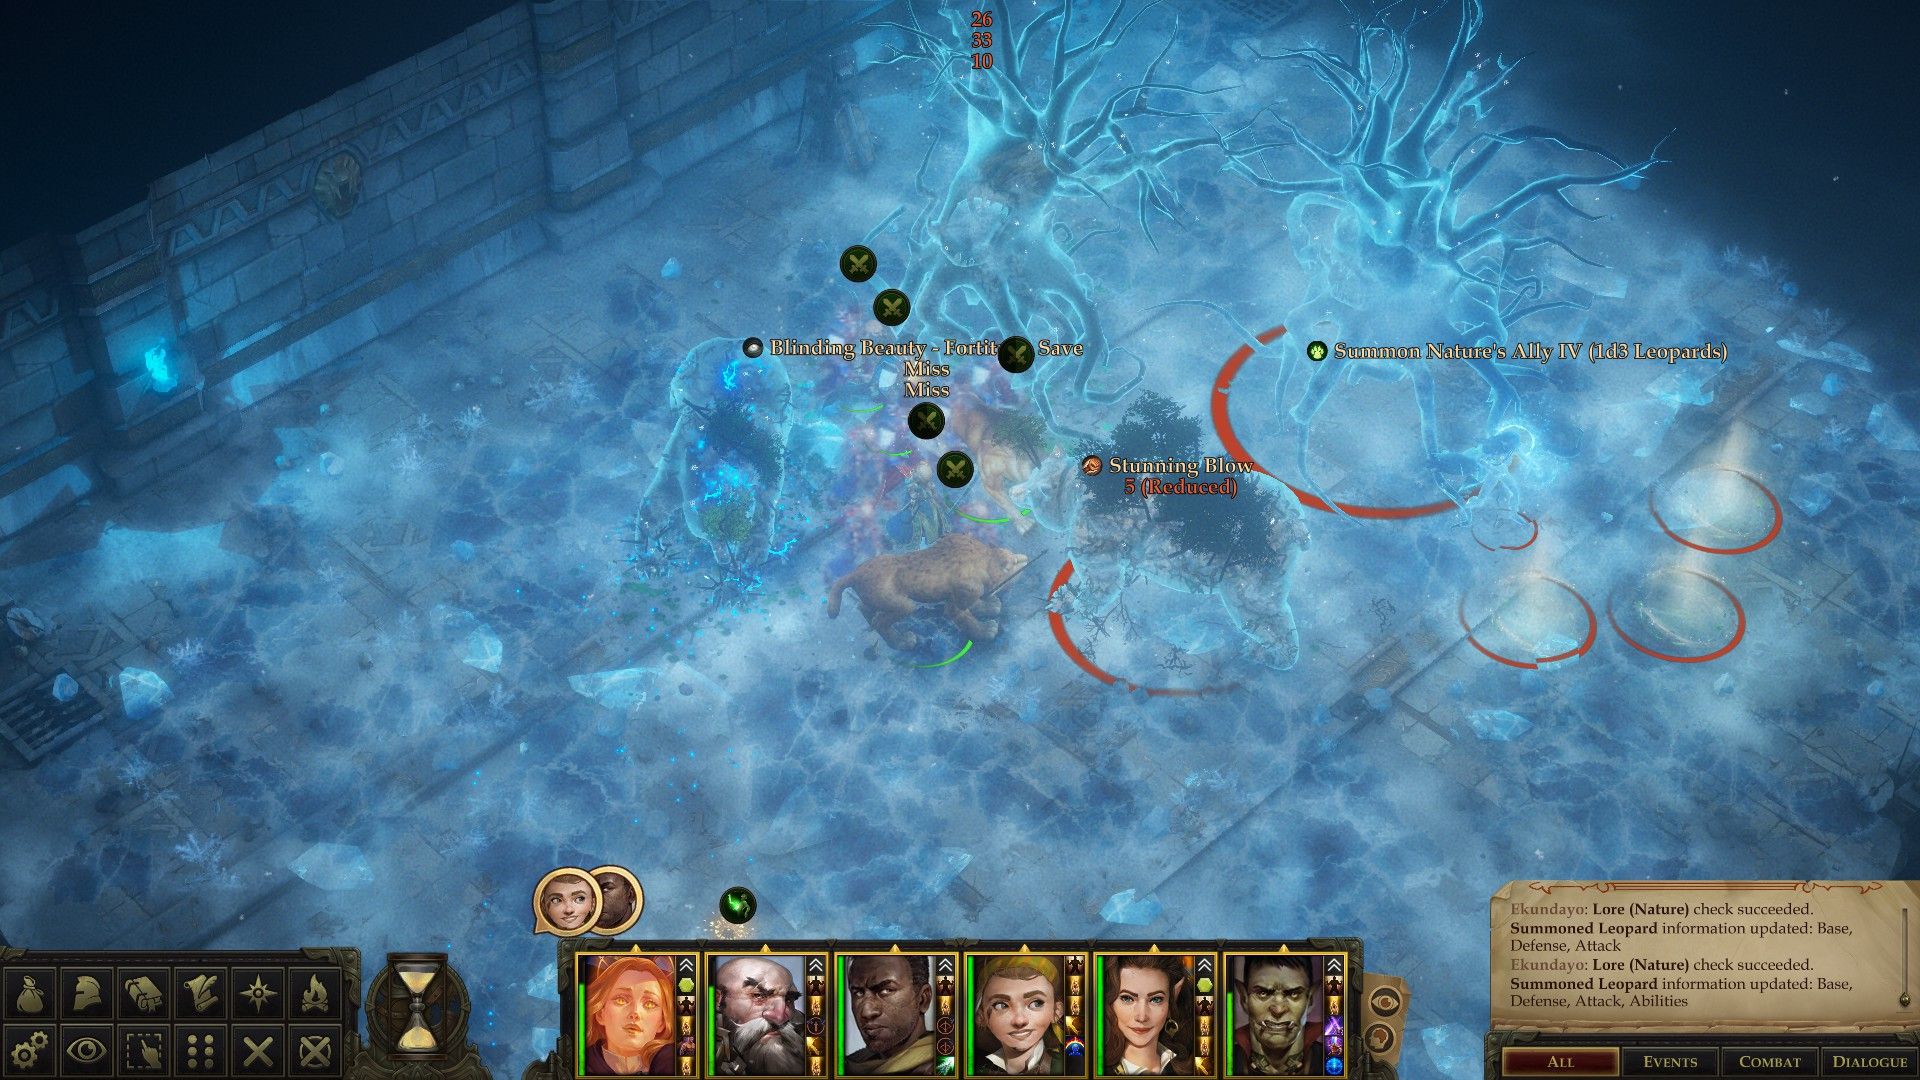 Melee move into an artic zone while rangers hold back in Pathfinder Kingmaker